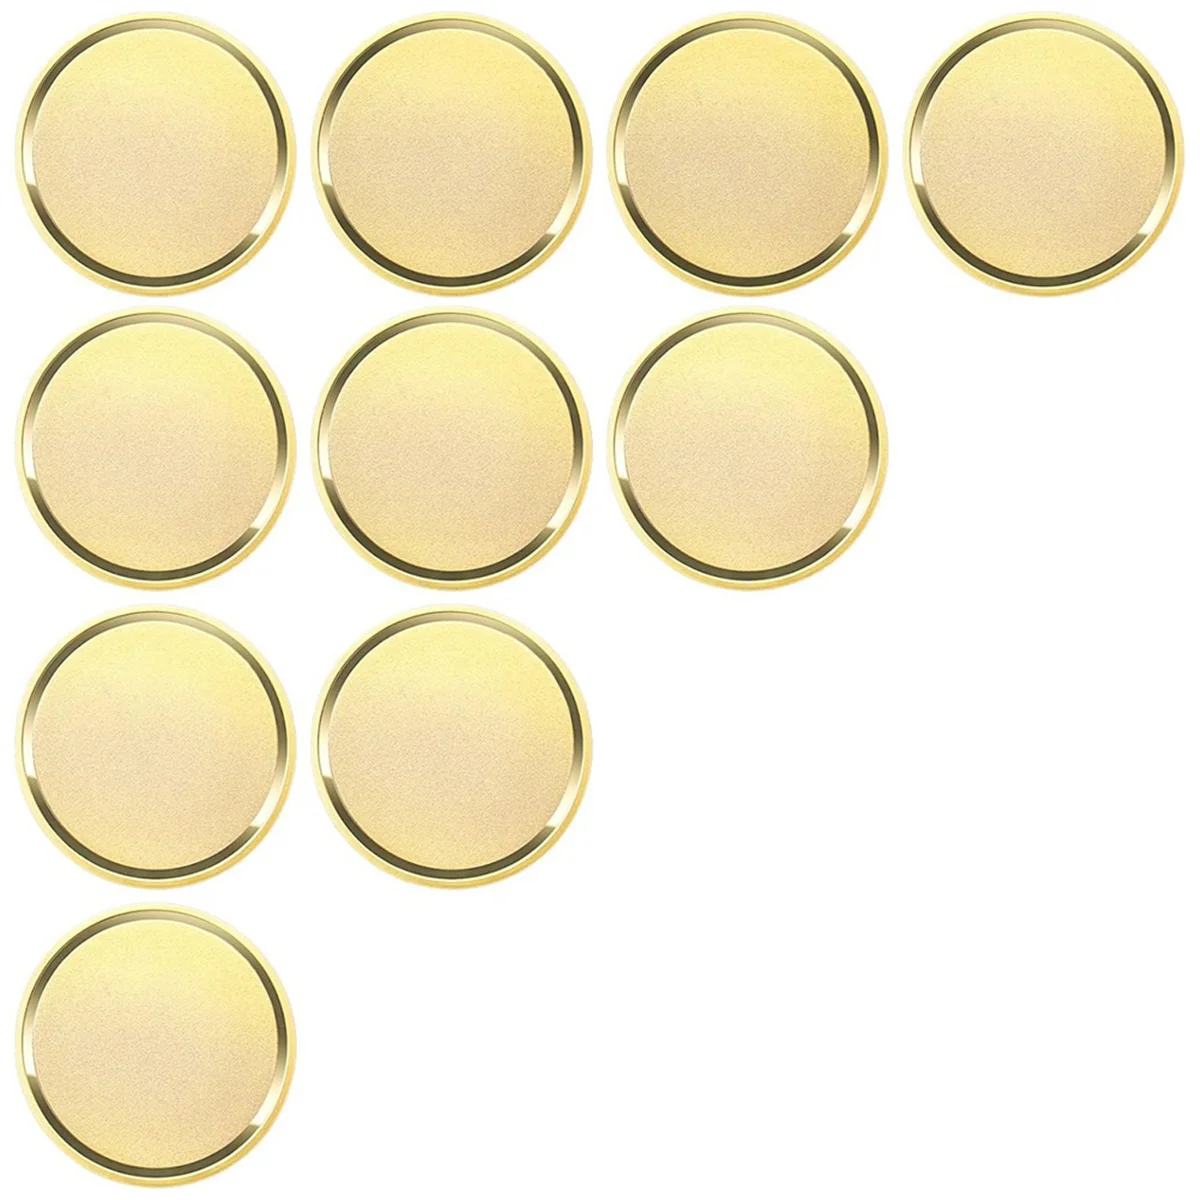 

10Pcs Brass Laser Engraving Blanks Blank Challenge Frosted Coin with Acrylic Protection Box - 40mm for DIY Crafts